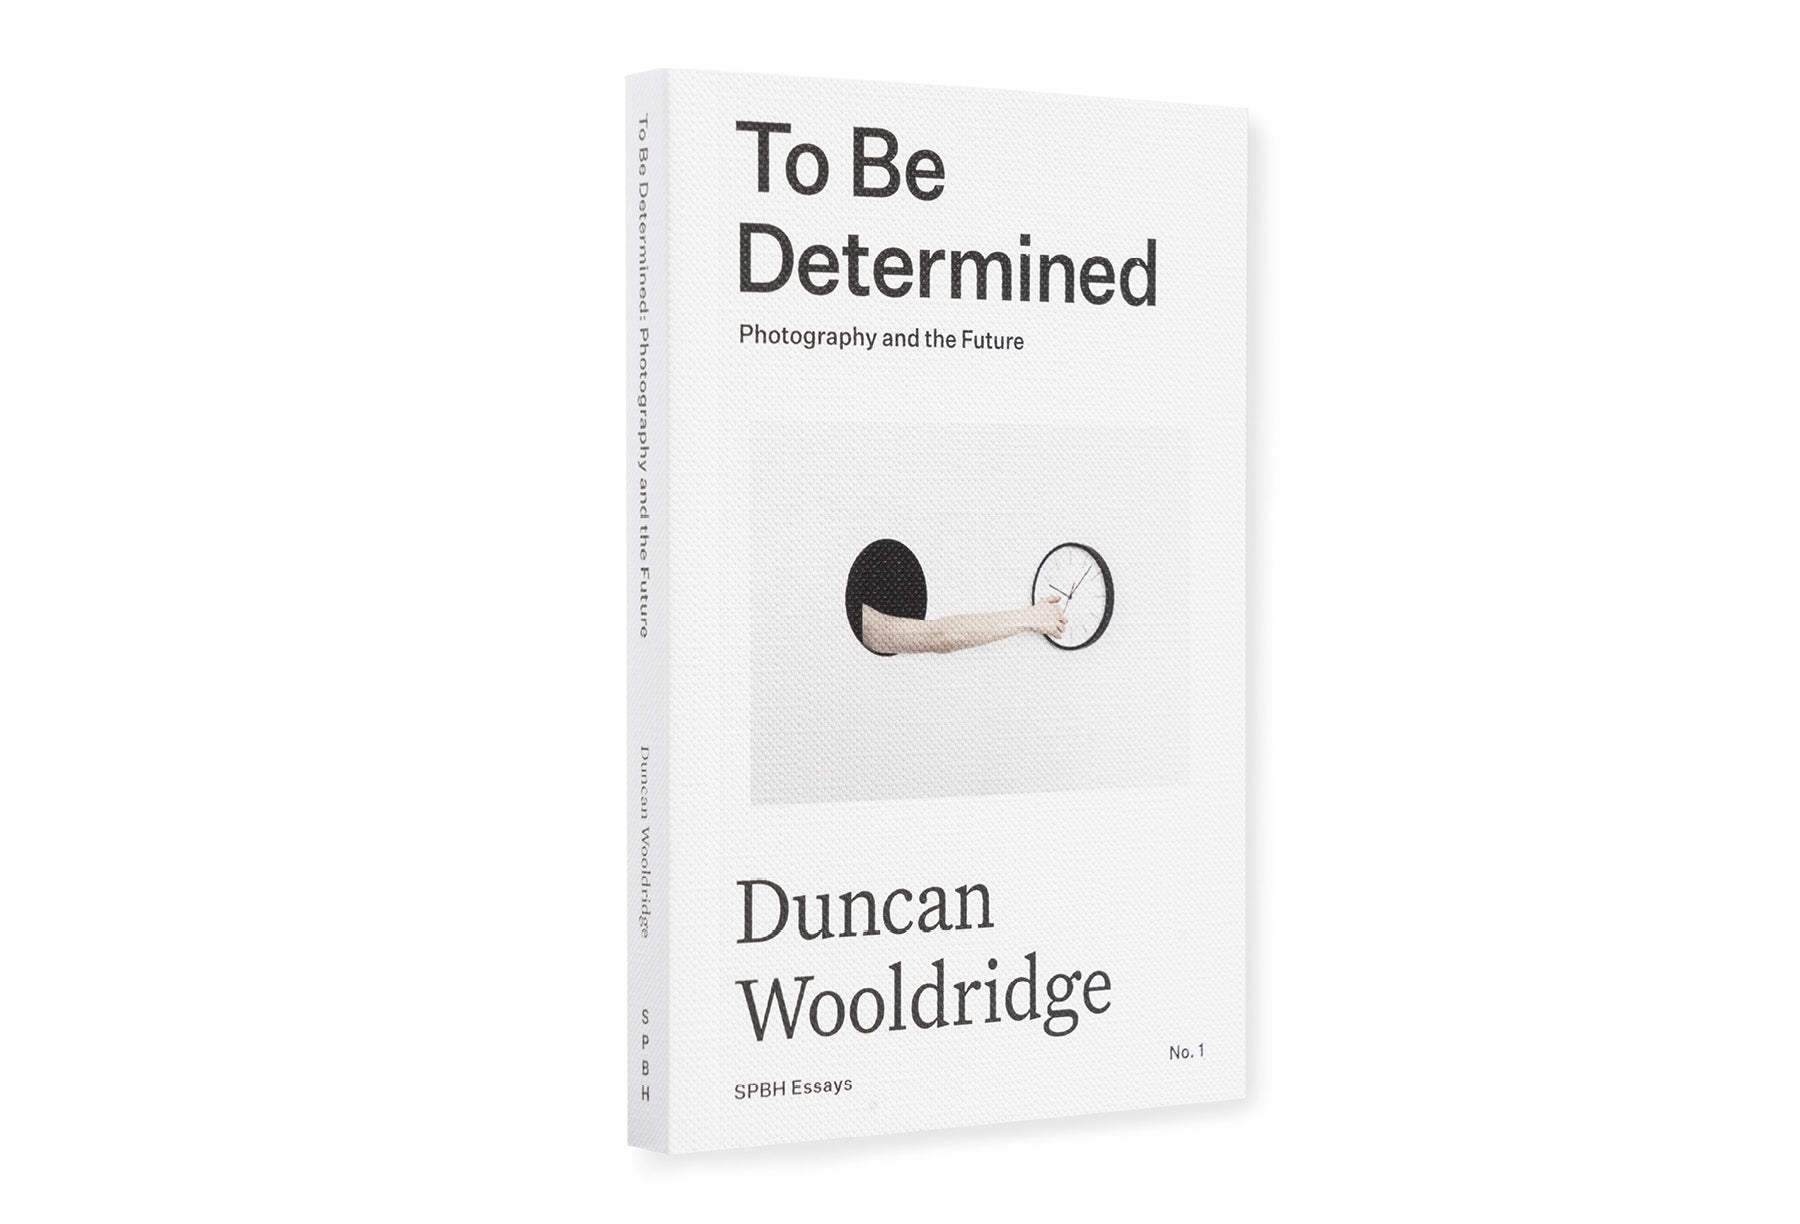 To Be Determined: Photography and the Future by Duncan Wooldridge